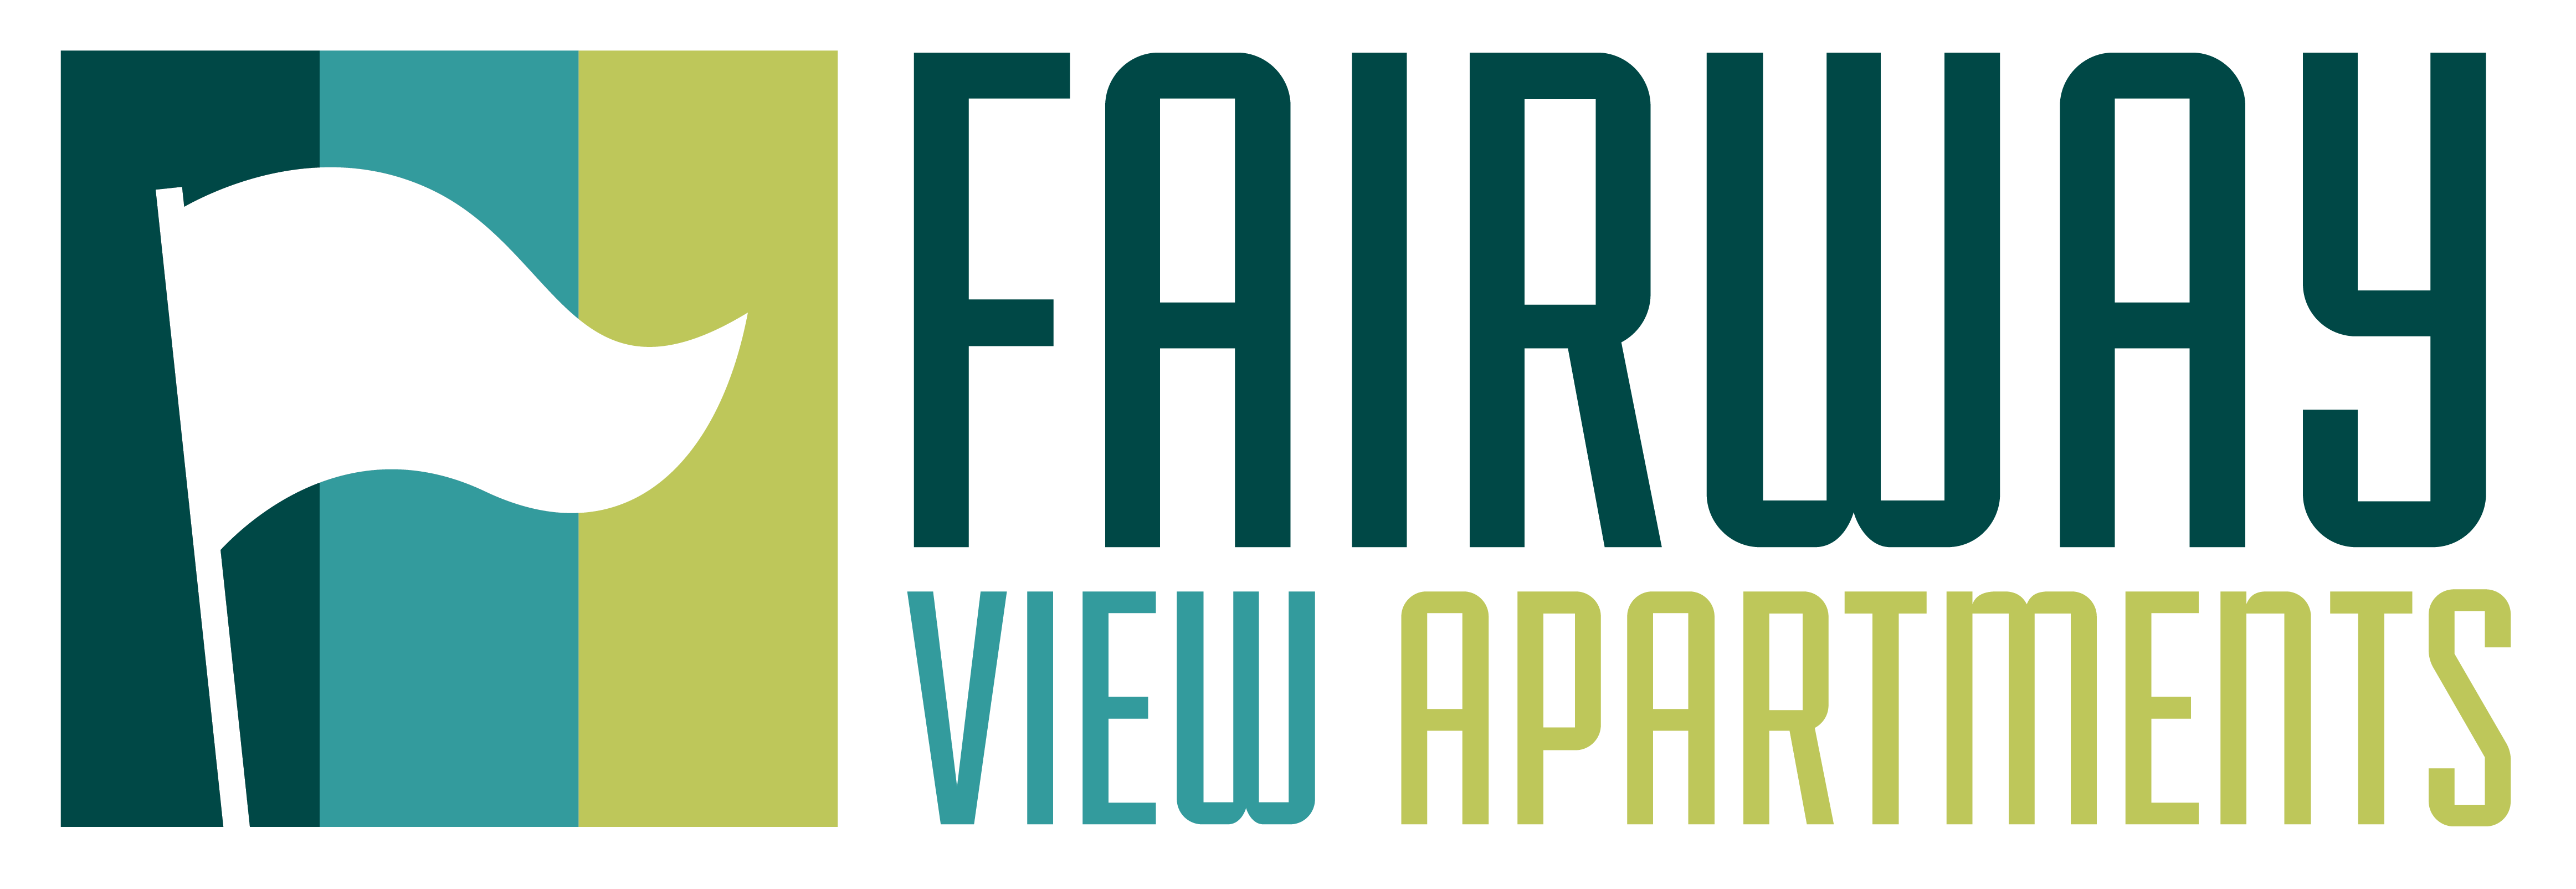 color logo for fairway view apartments